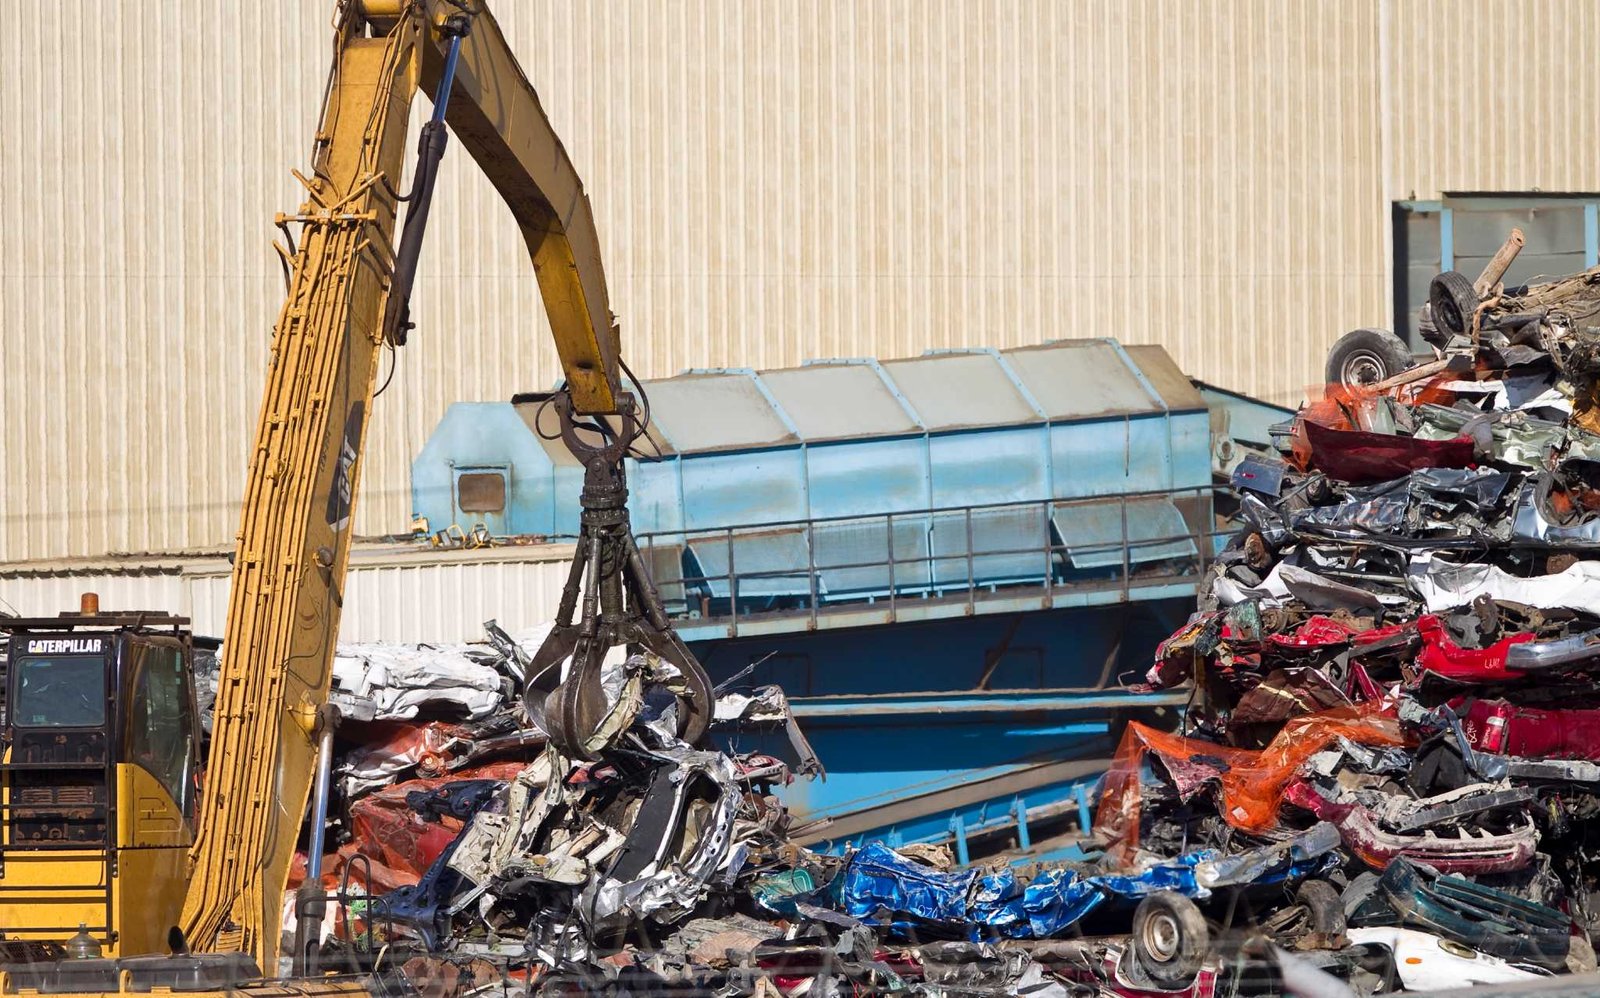 When Did the Scrap Metal Problem Emerge in the Automotive Industry?